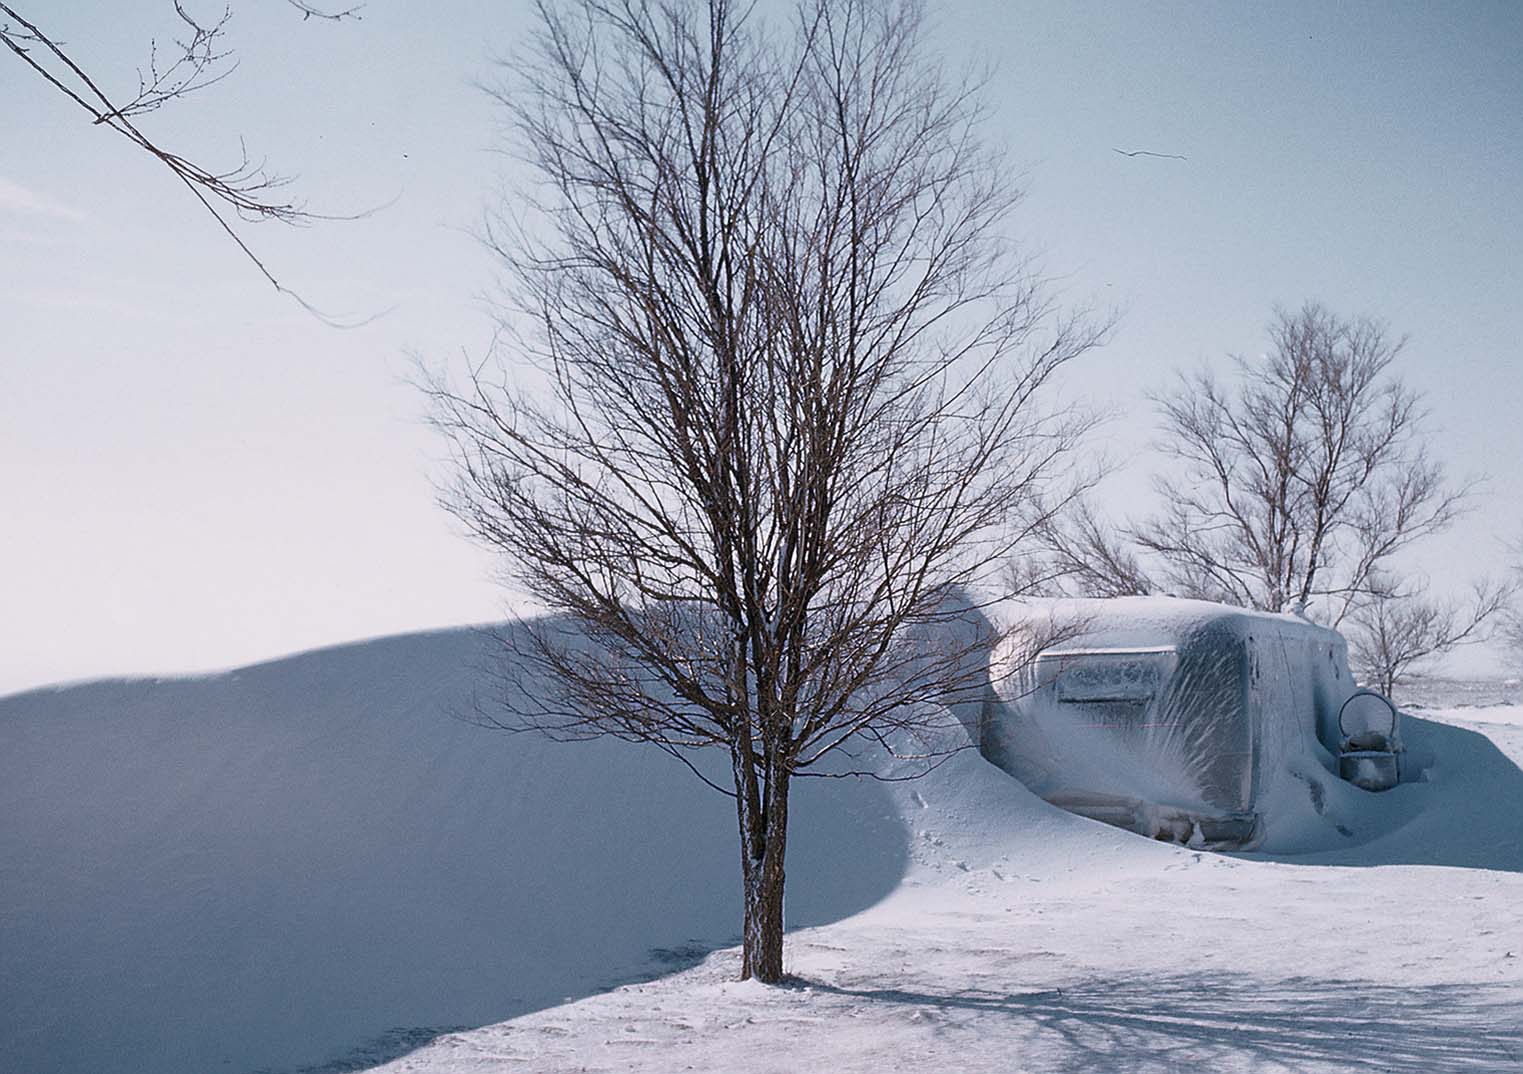 Trailer house with snow drift next to it.